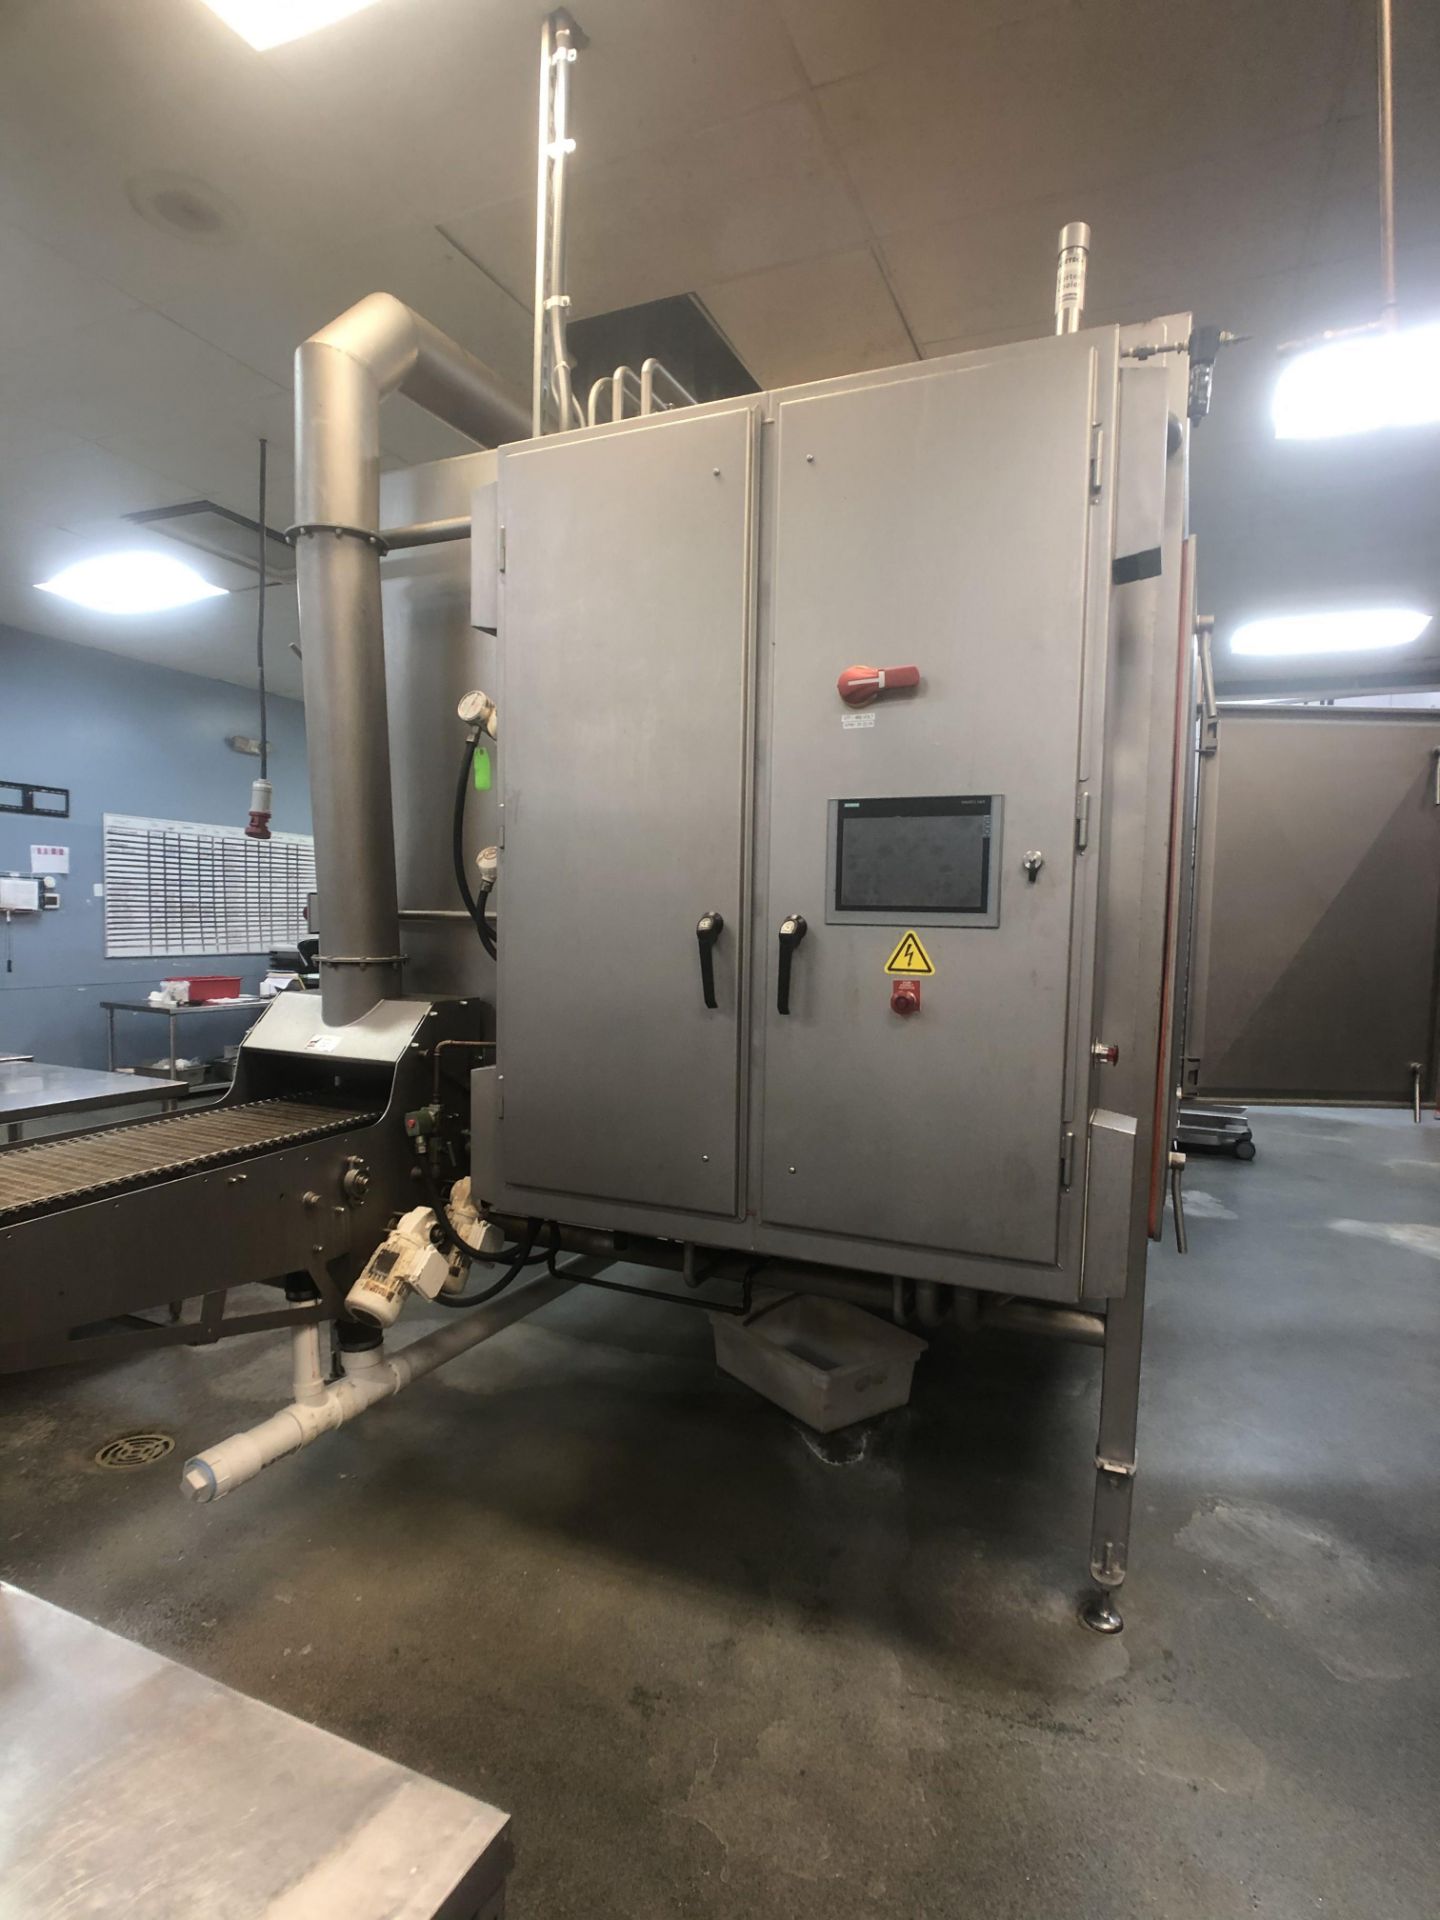 2019 Unitherm 16" Mini-Spiral Gas Oven, Model SSO-15.75-1.6-10T-G, S/N SPOV-3S19, Includes Infeed - Image 2 of 20